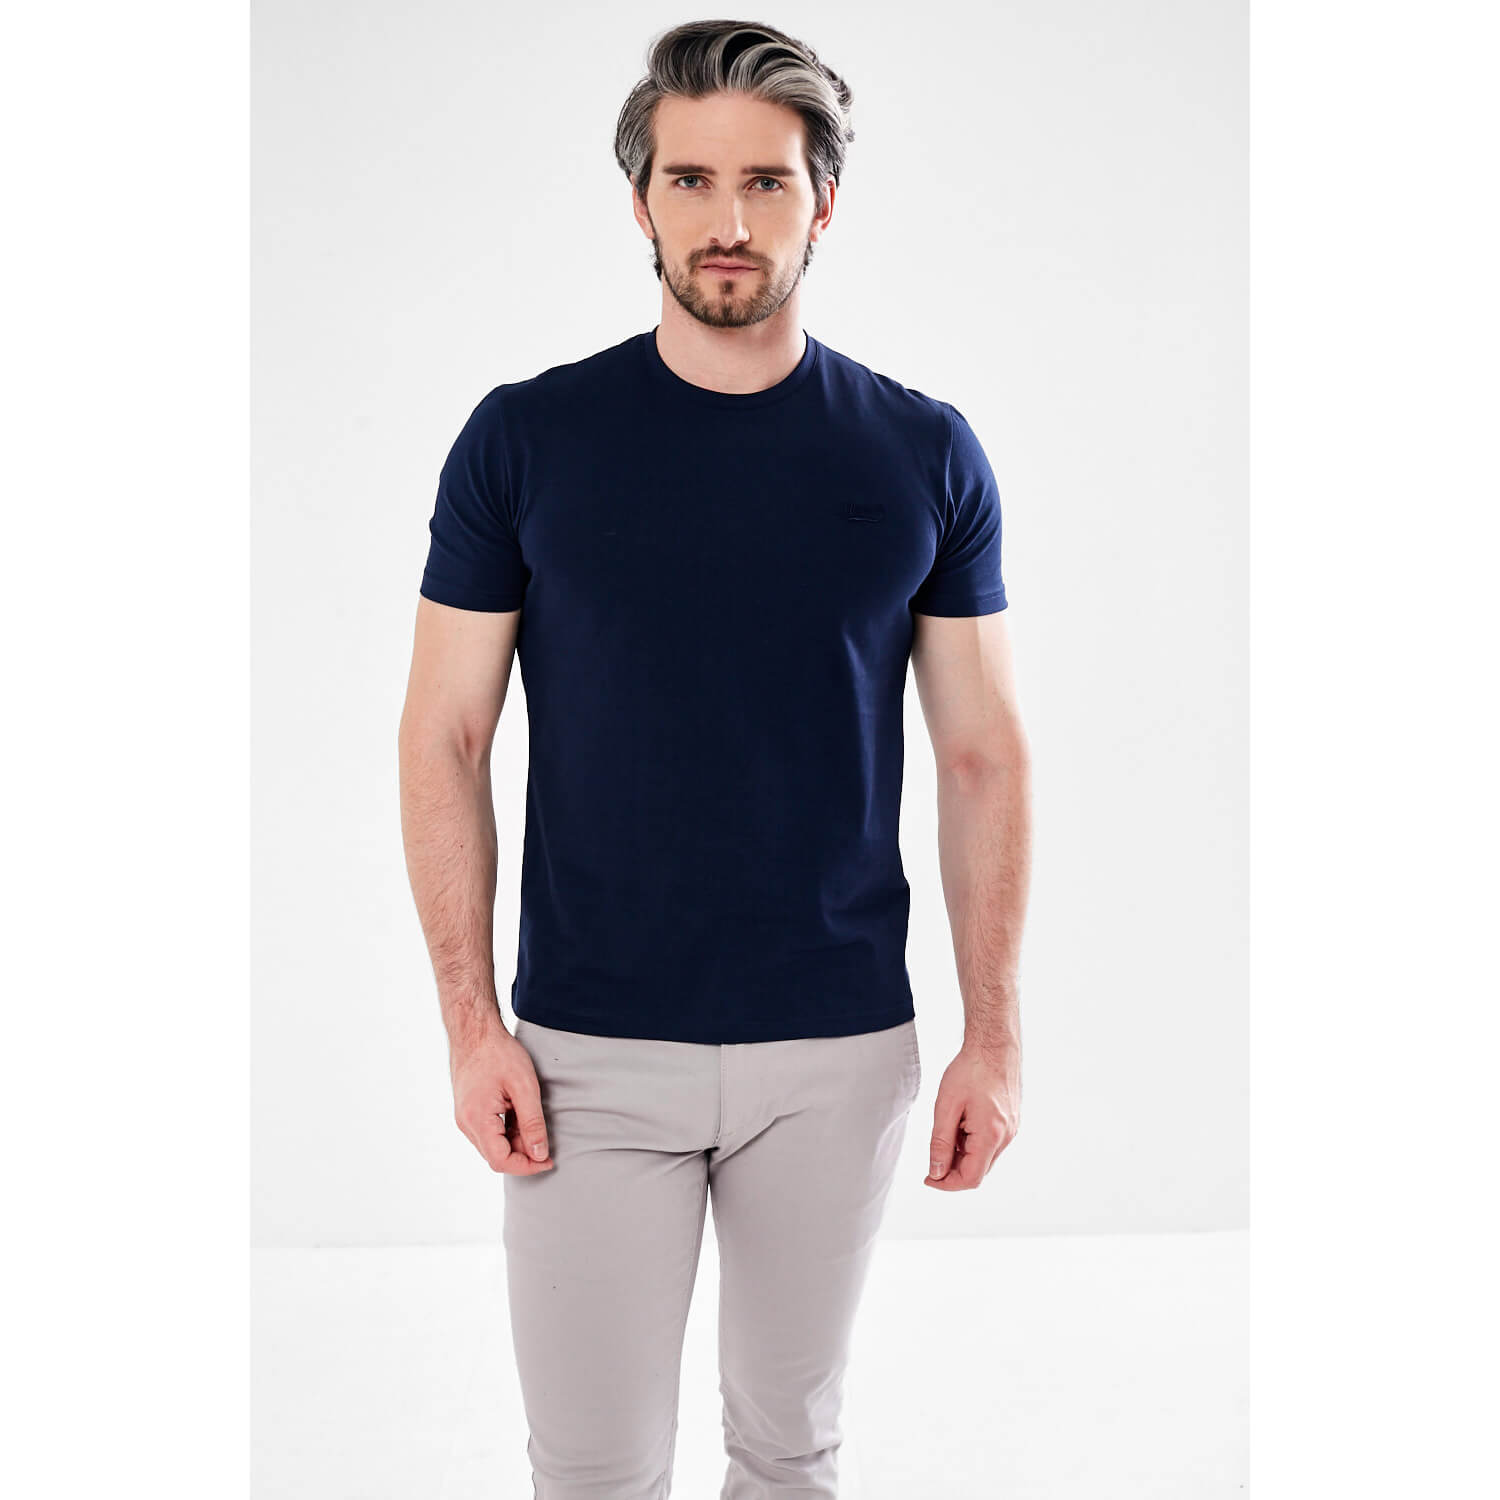 Mineral Glock Plain Tee - Navy 1 Shaws Department Stores